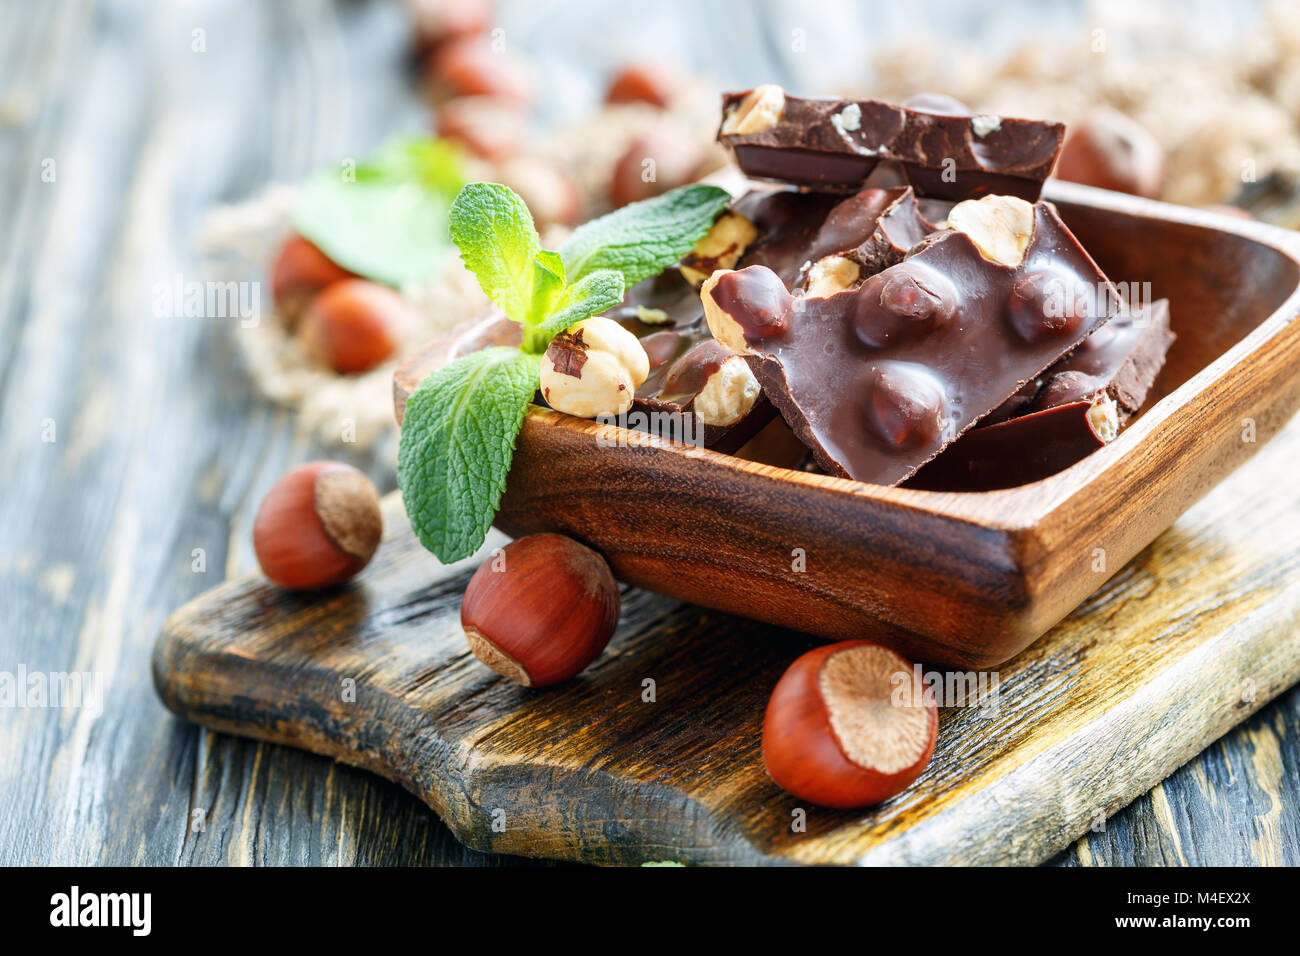 Dark chocolate with hazelnuts and mint leaves. Stock Photo